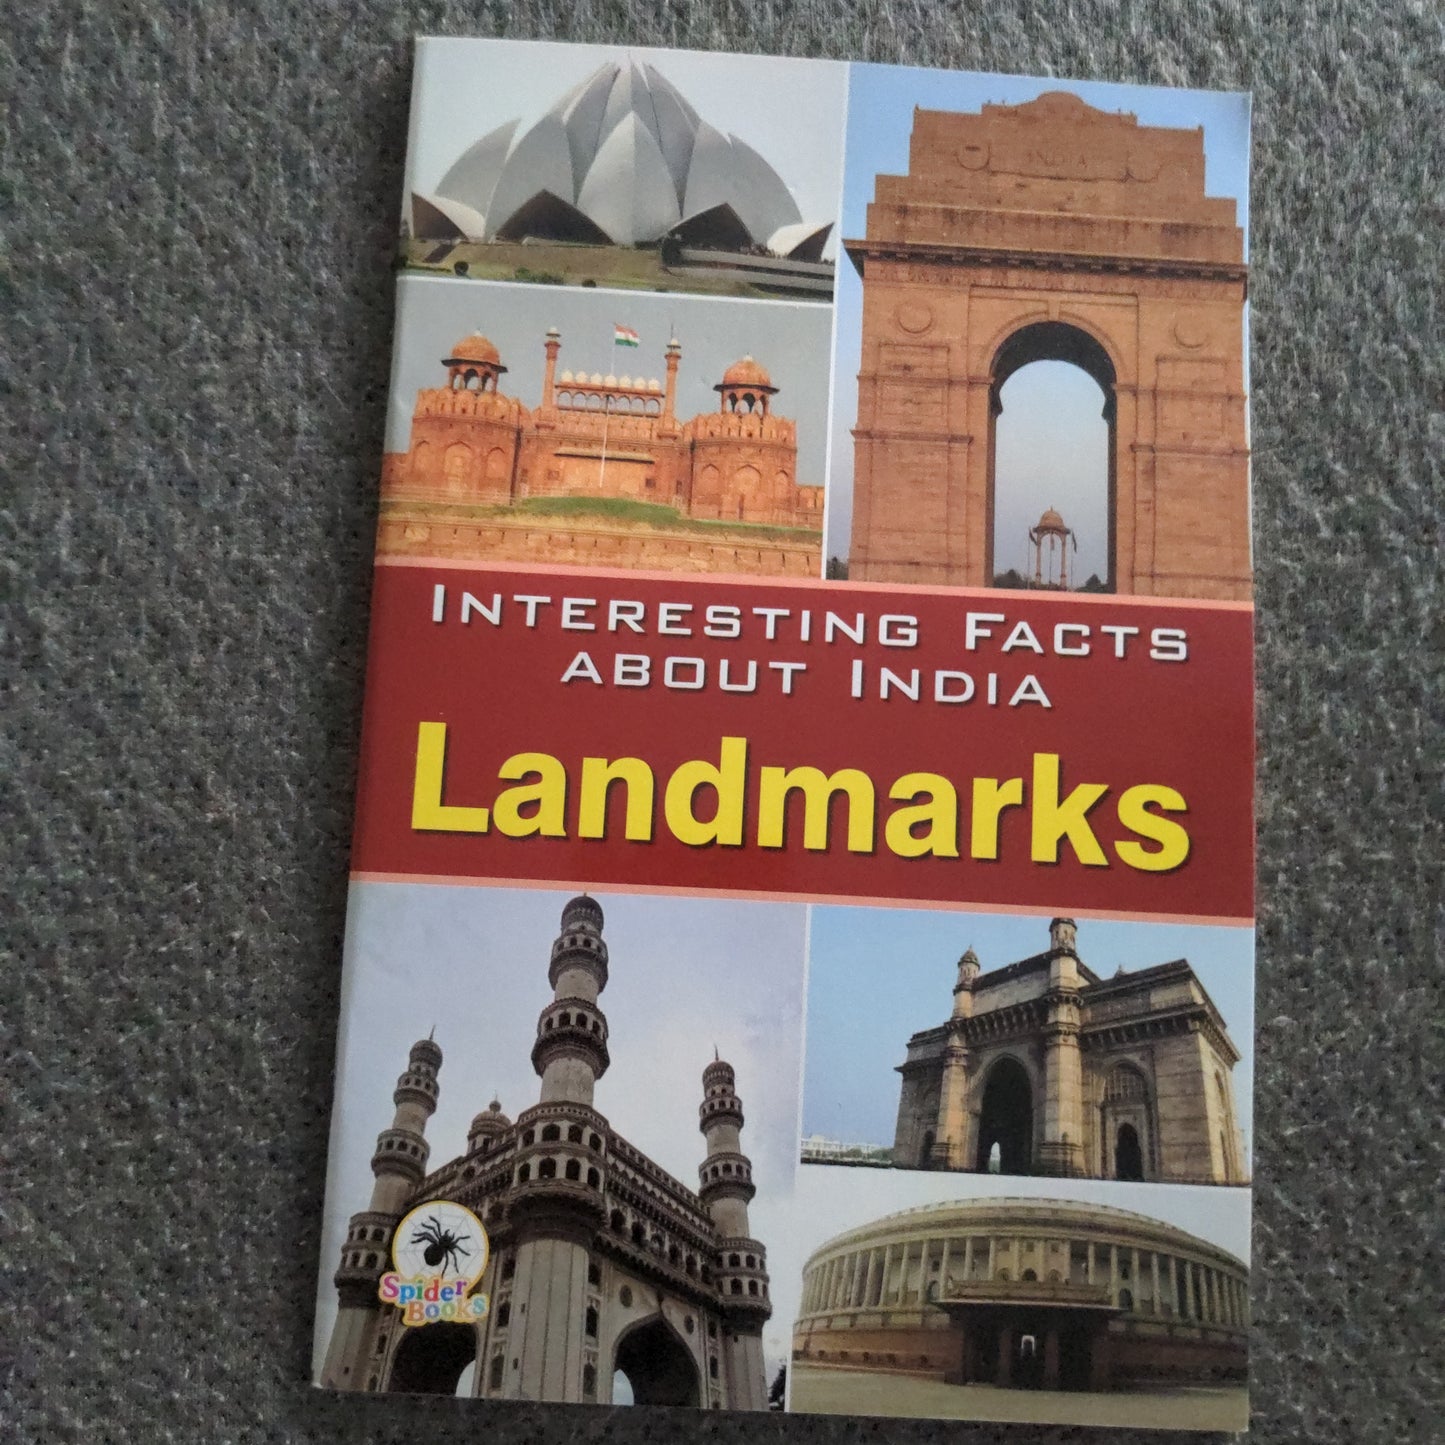 Landmarks - Interesting facts about India